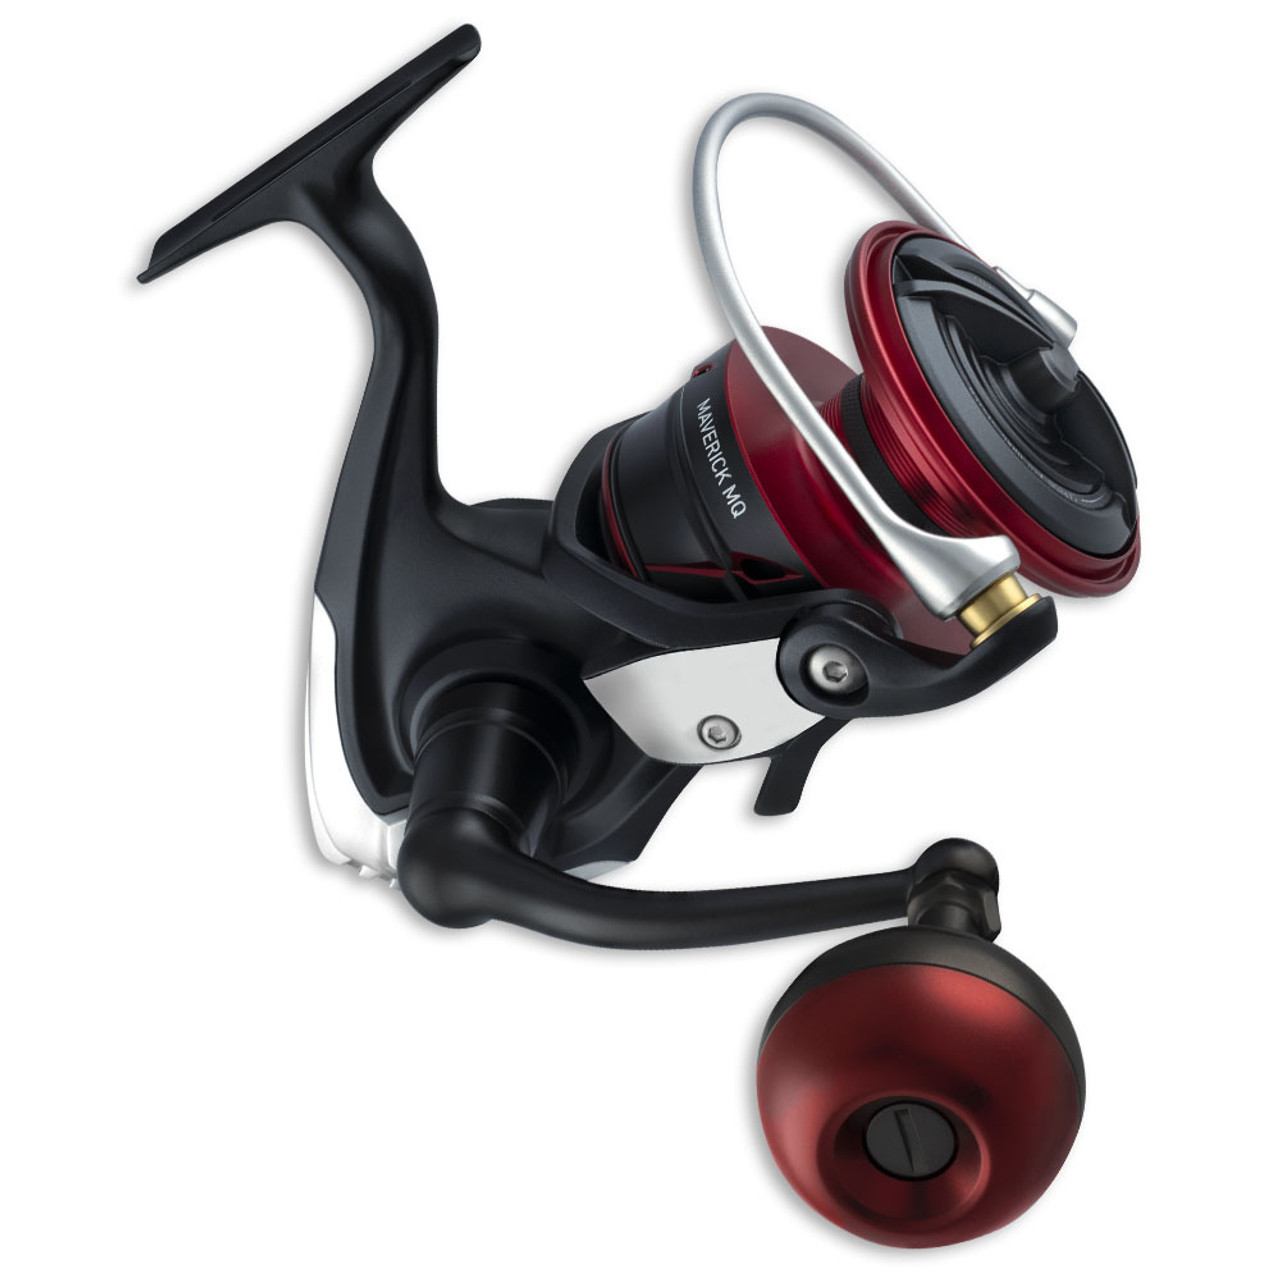 Daiwa exist 1000 or 2500? - Fishing Rods, Reels, Line, and Knots